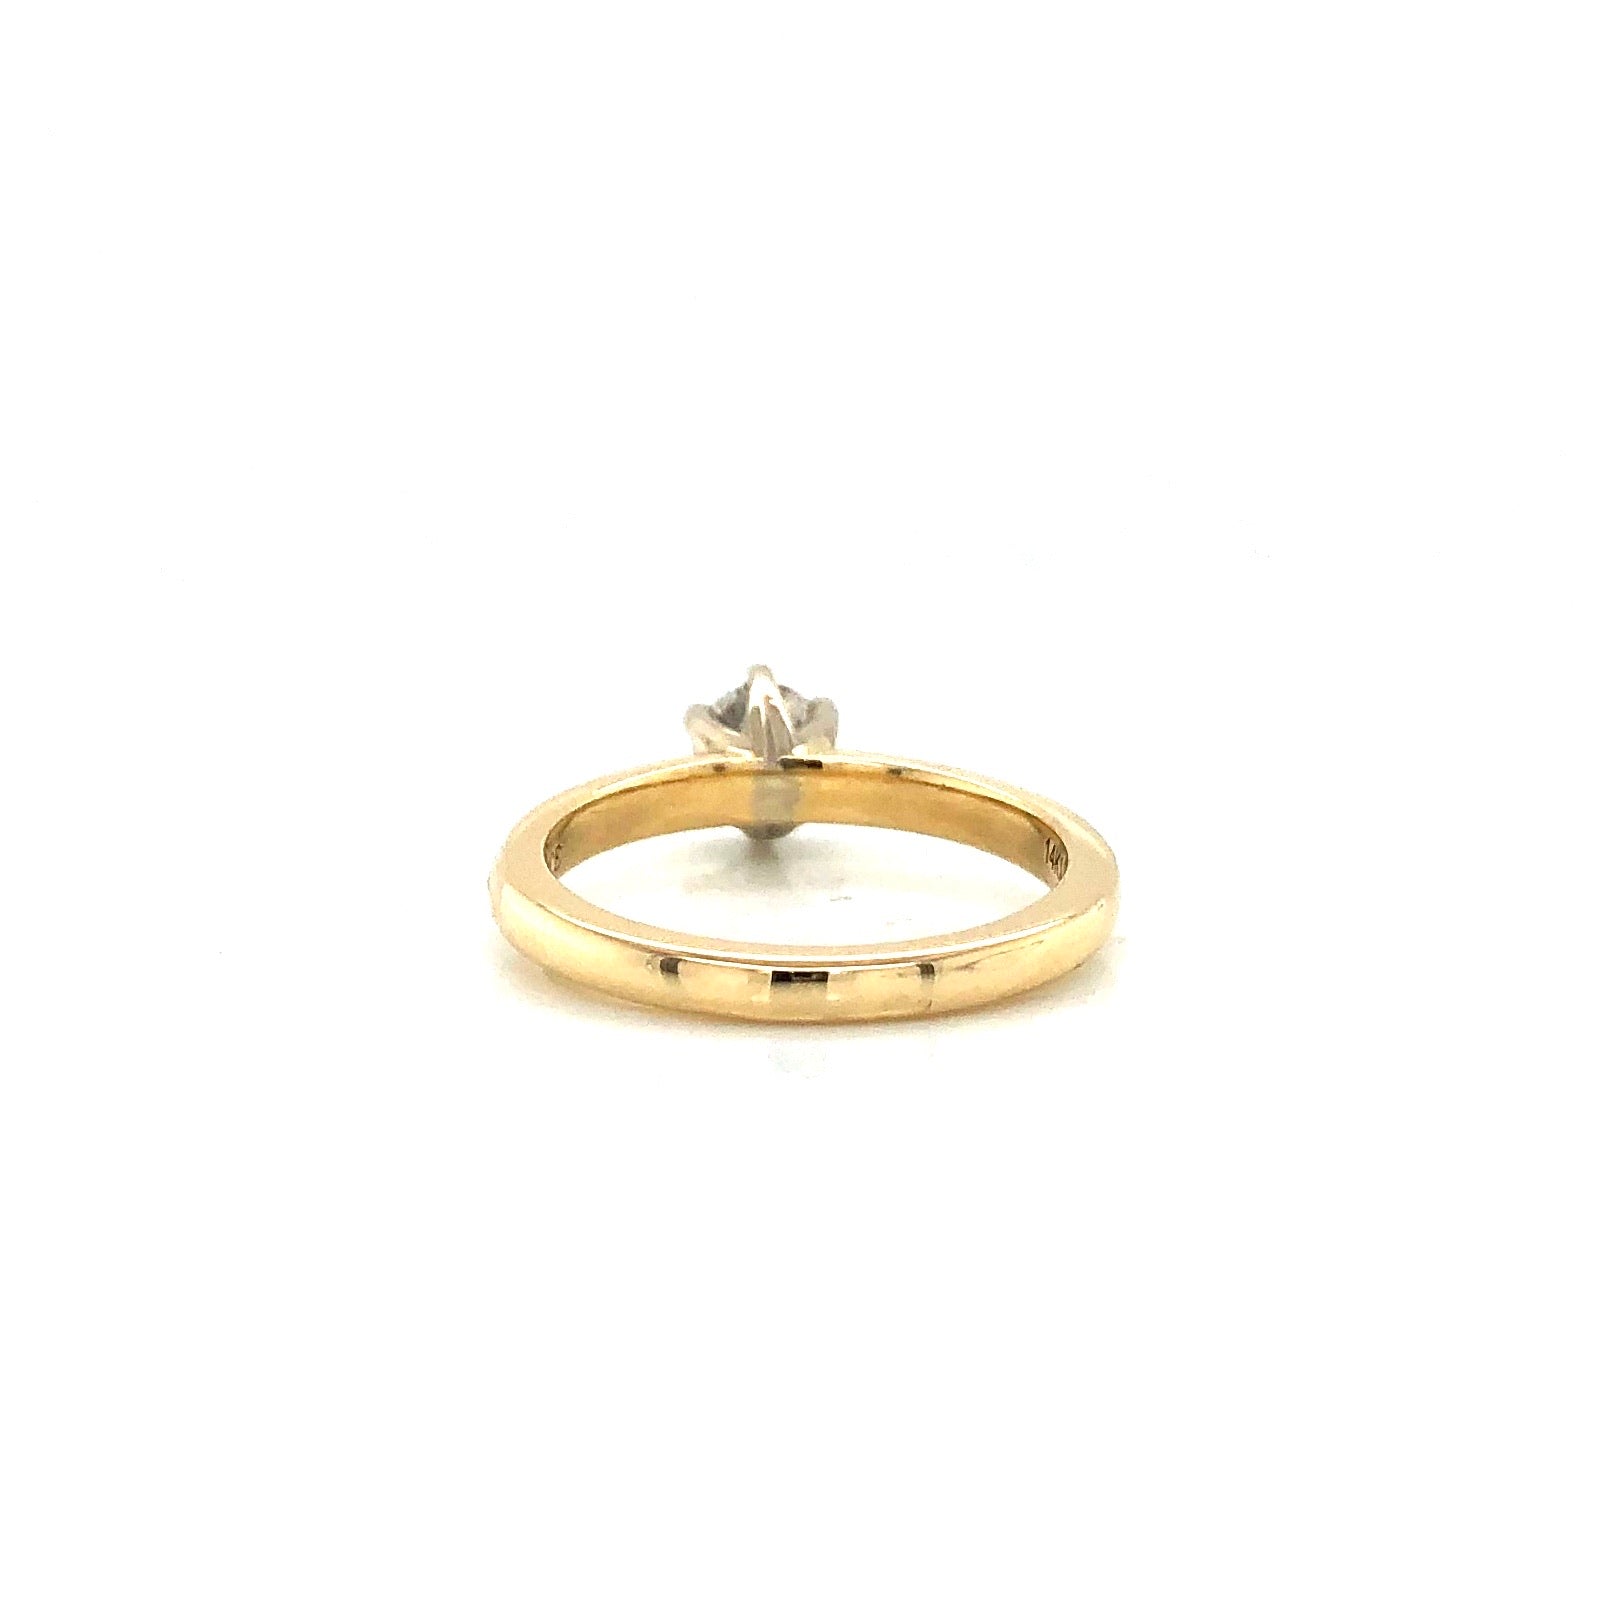 Diamond Spray Open Statement Ring in 14K Yellow Gold, 1.40 ct. t.w. - 100%  Exclusive